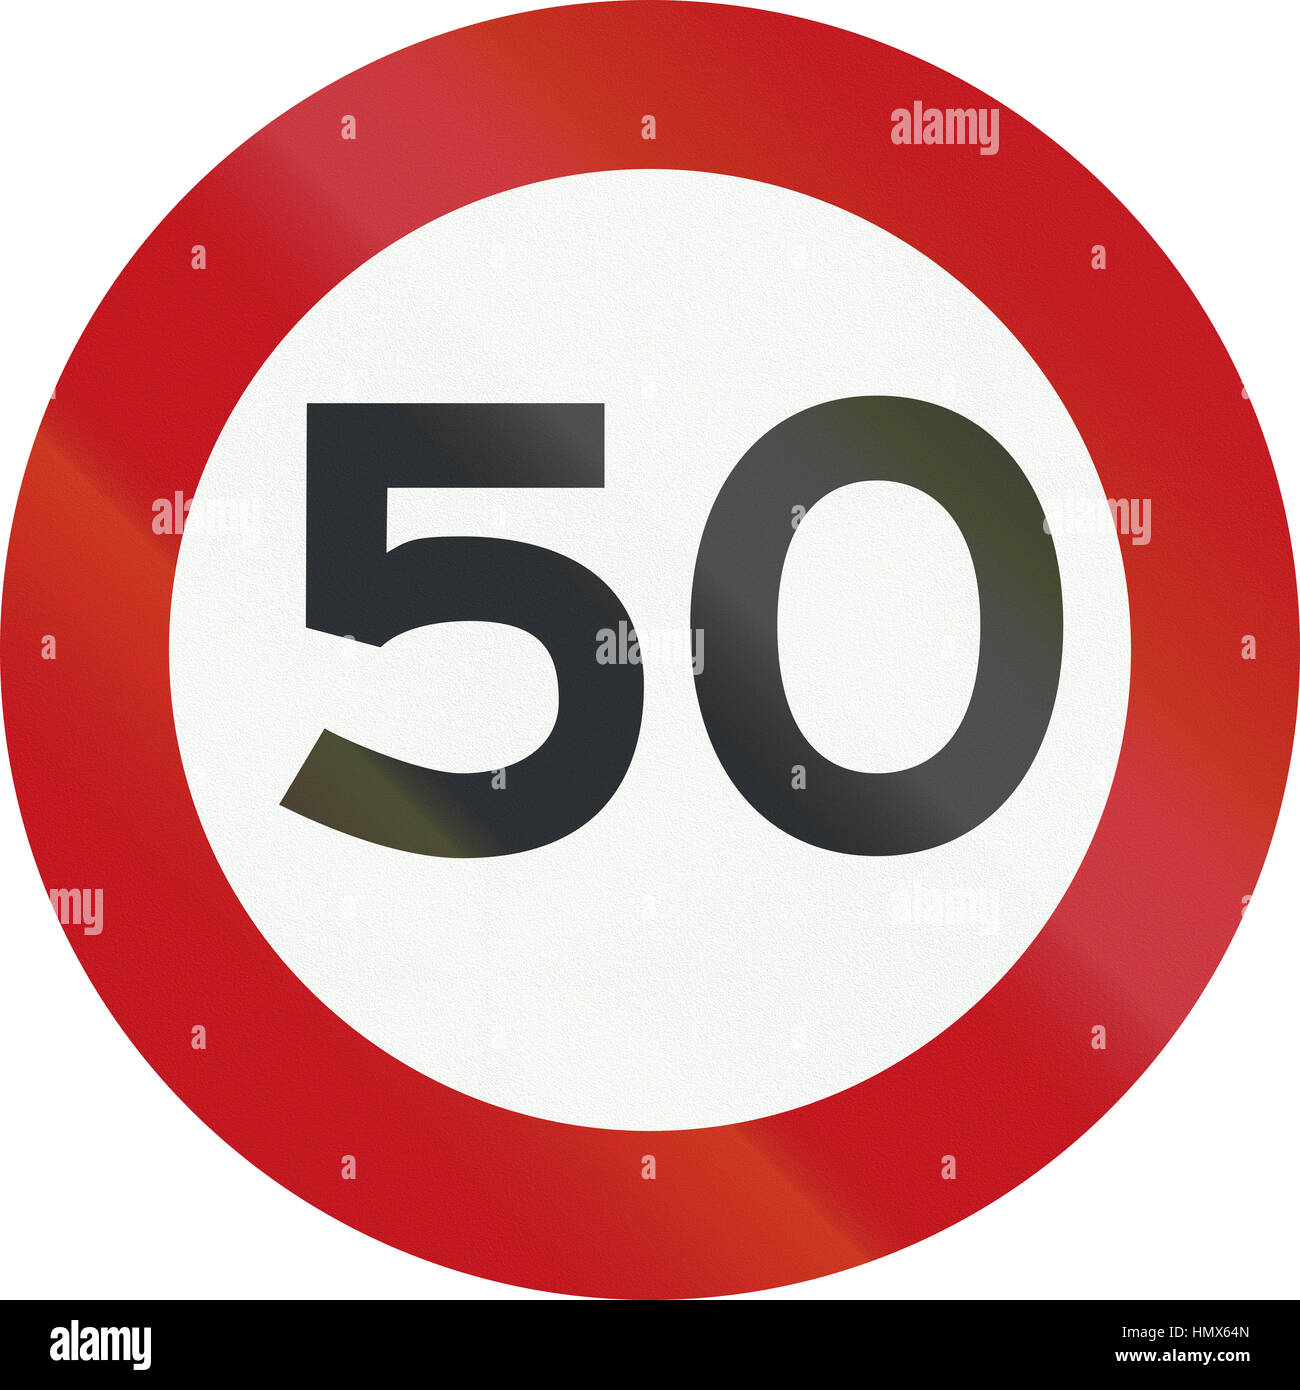 Dutch road sign A1 - Speed limit 50 Kmh. Stock Photo